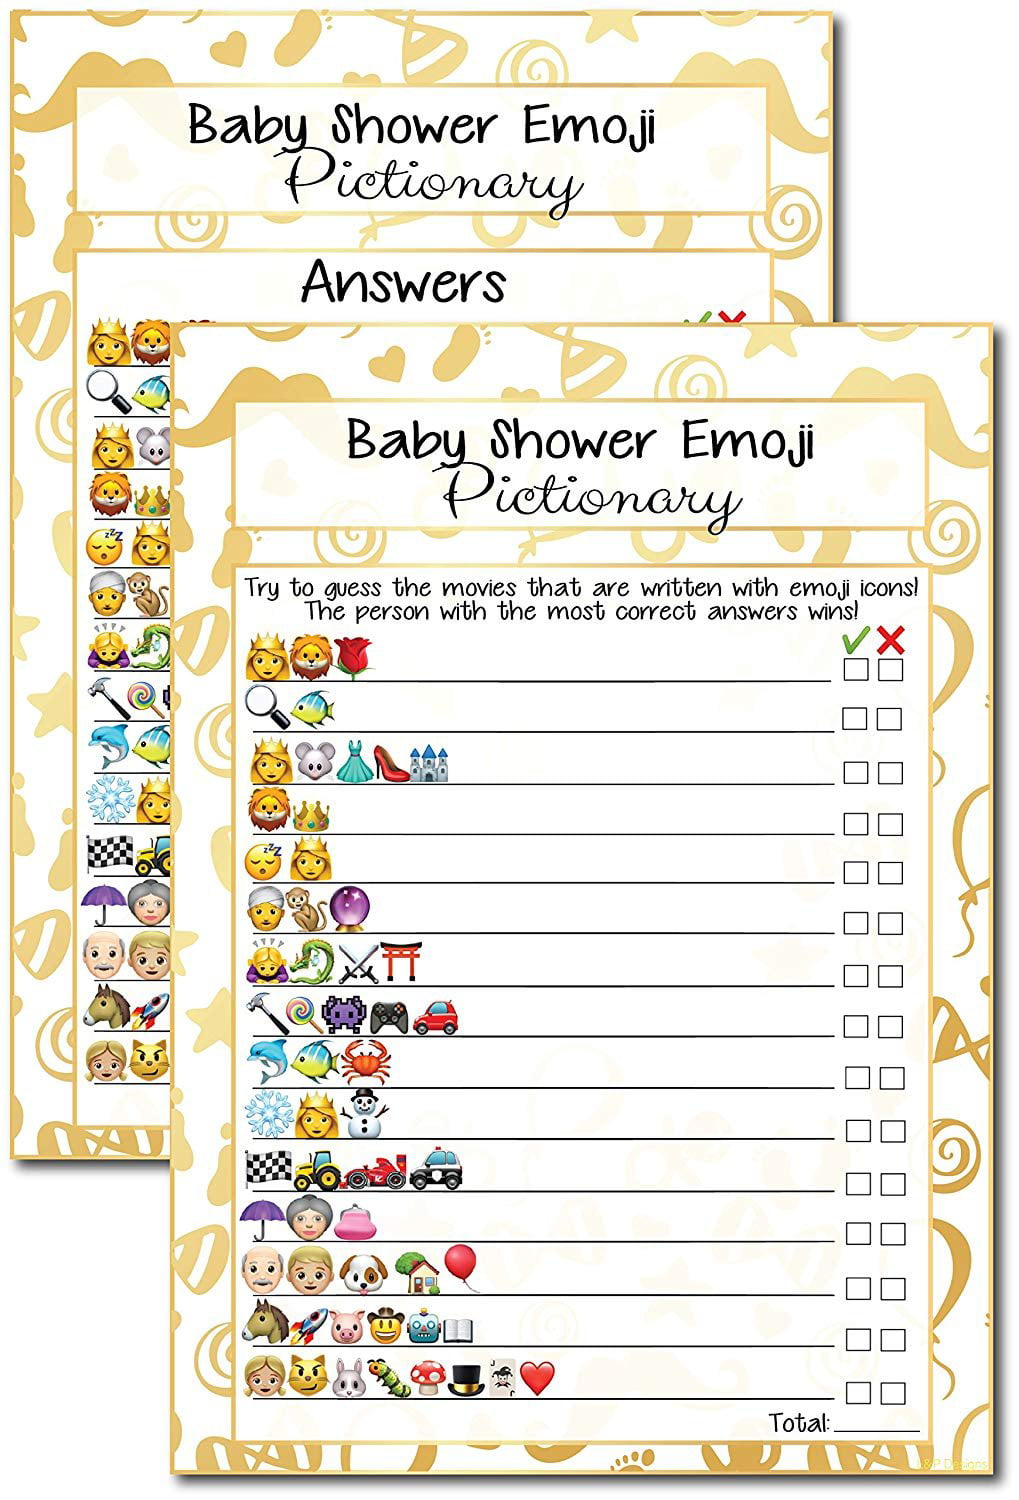 20 Kids Movie Emoji Pictionary Baby Shower Games Ideas For ...